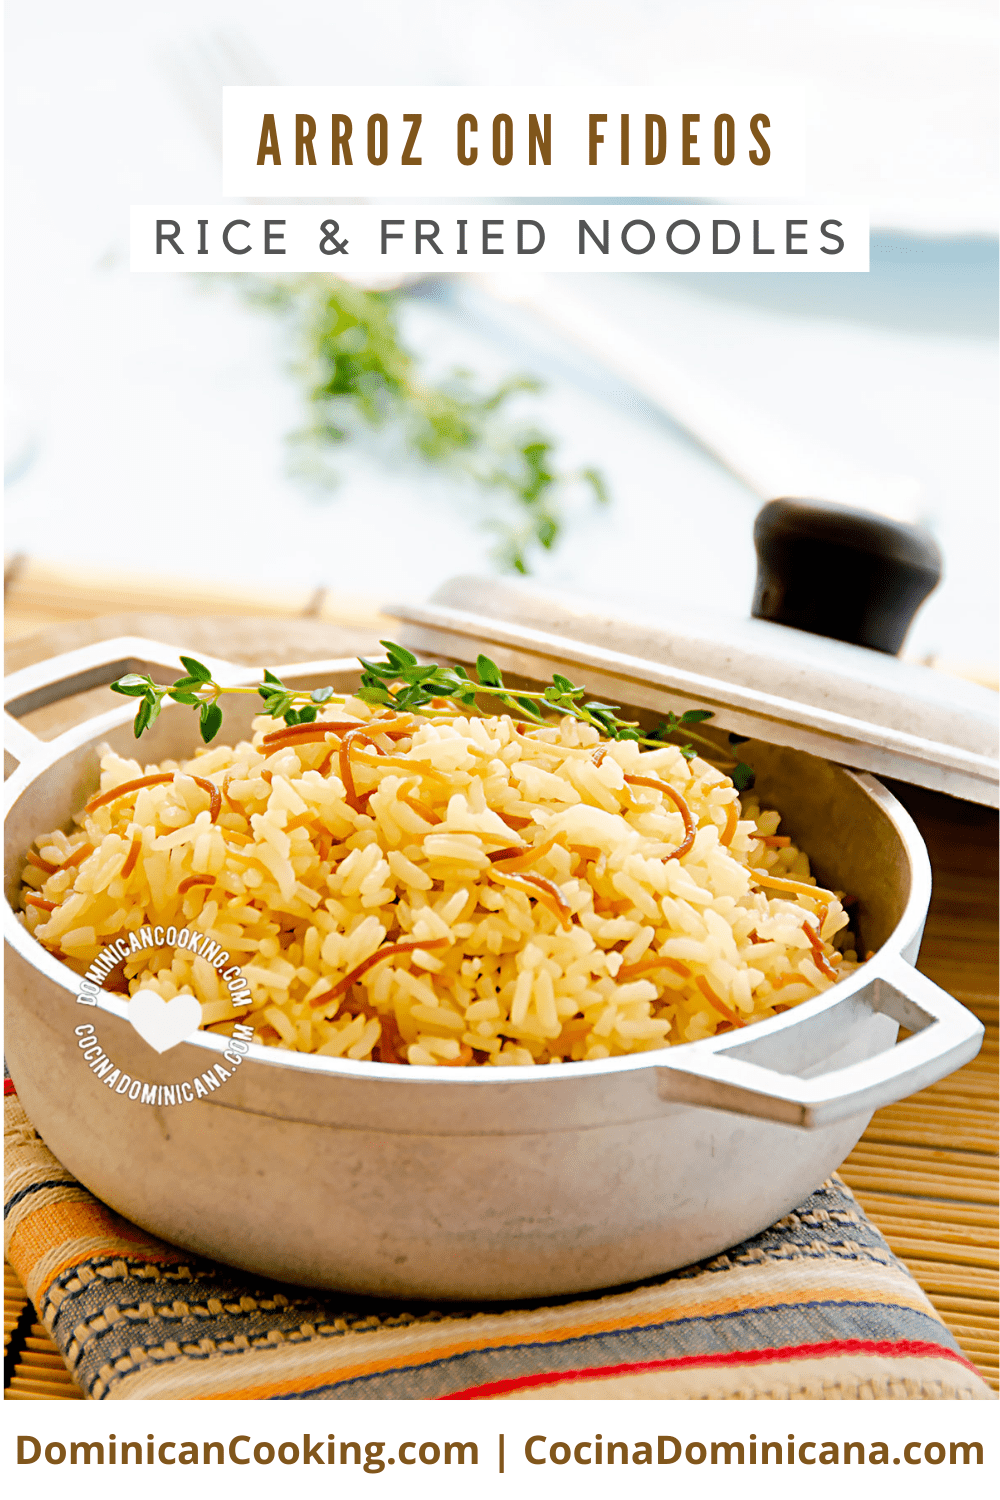 Arroz con fideos (rice and fried noodles) recipe.